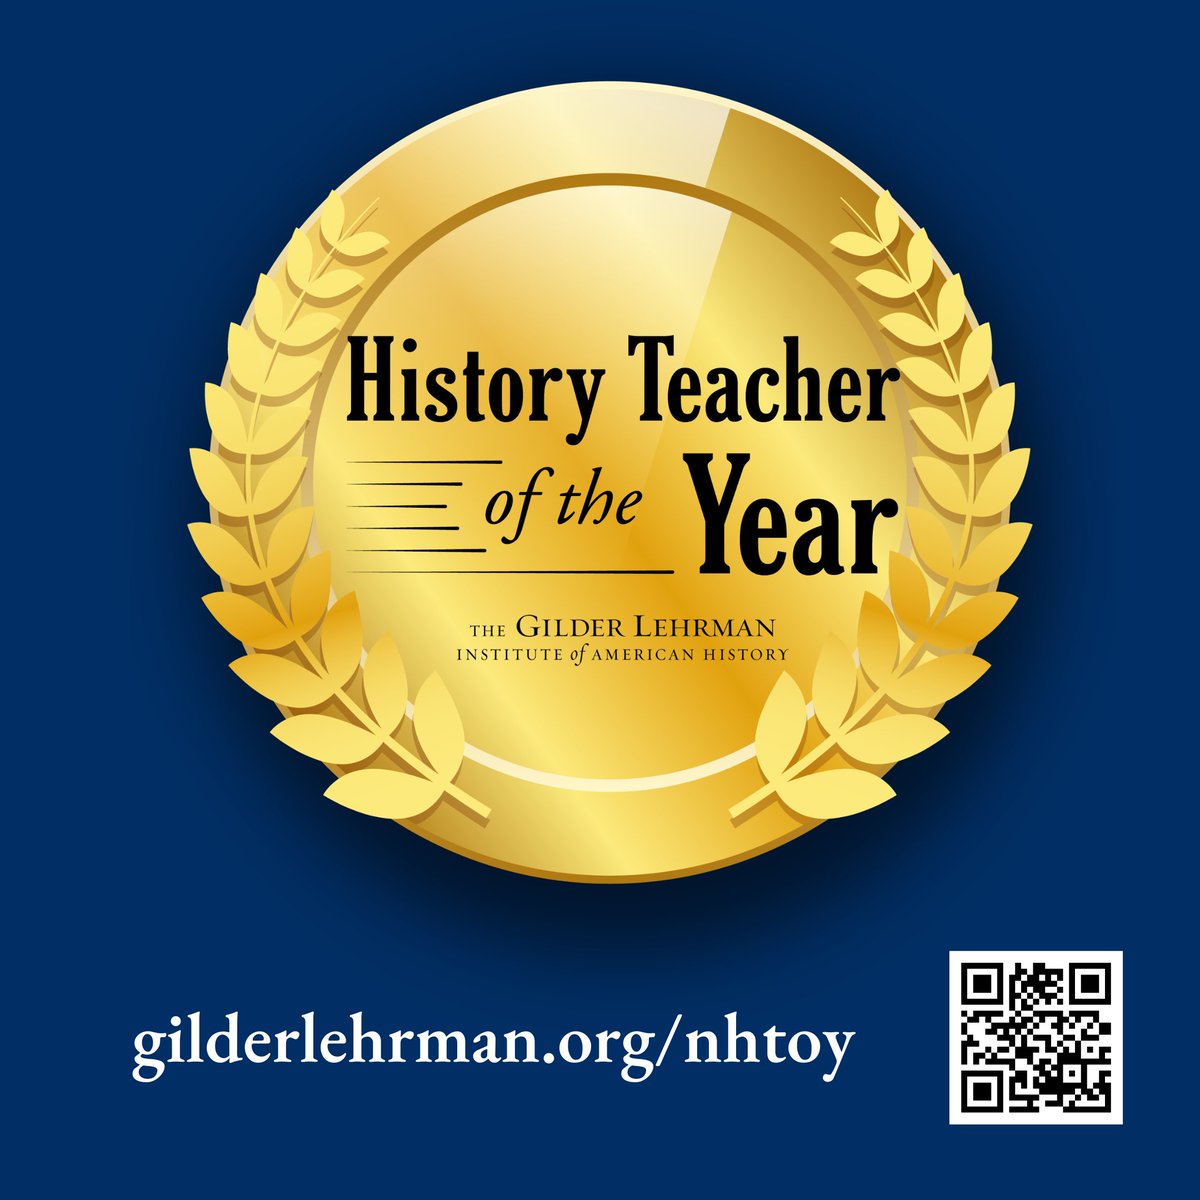 Do you know an incredible 𝐇𝐢𝐬𝐭𝐨𝐫𝐲 teacher? Who 𝓲𝓷𝓼𝓹𝓲𝓻𝓮𝓼 students? Who makes learning 𝙚𝙣𝙜𝙖𝙜𝙞𝙣𝙜 and 𝕞𝕖𝕒𝕟𝕚𝕟𝕘𝕗𝕦𝕝? It's time to nominate that teacher to be the next @Gilder_Lehrman ミ★ 𝘏𝘪𝘴𝘵𝘰𝘳𝘺 𝘛𝘦𝘢𝘤𝘩𝘦𝘳 𝘰𝘧 𝘵𝘩𝘦 𝘠𝘦𝘢𝘳 ★彡 #sschat